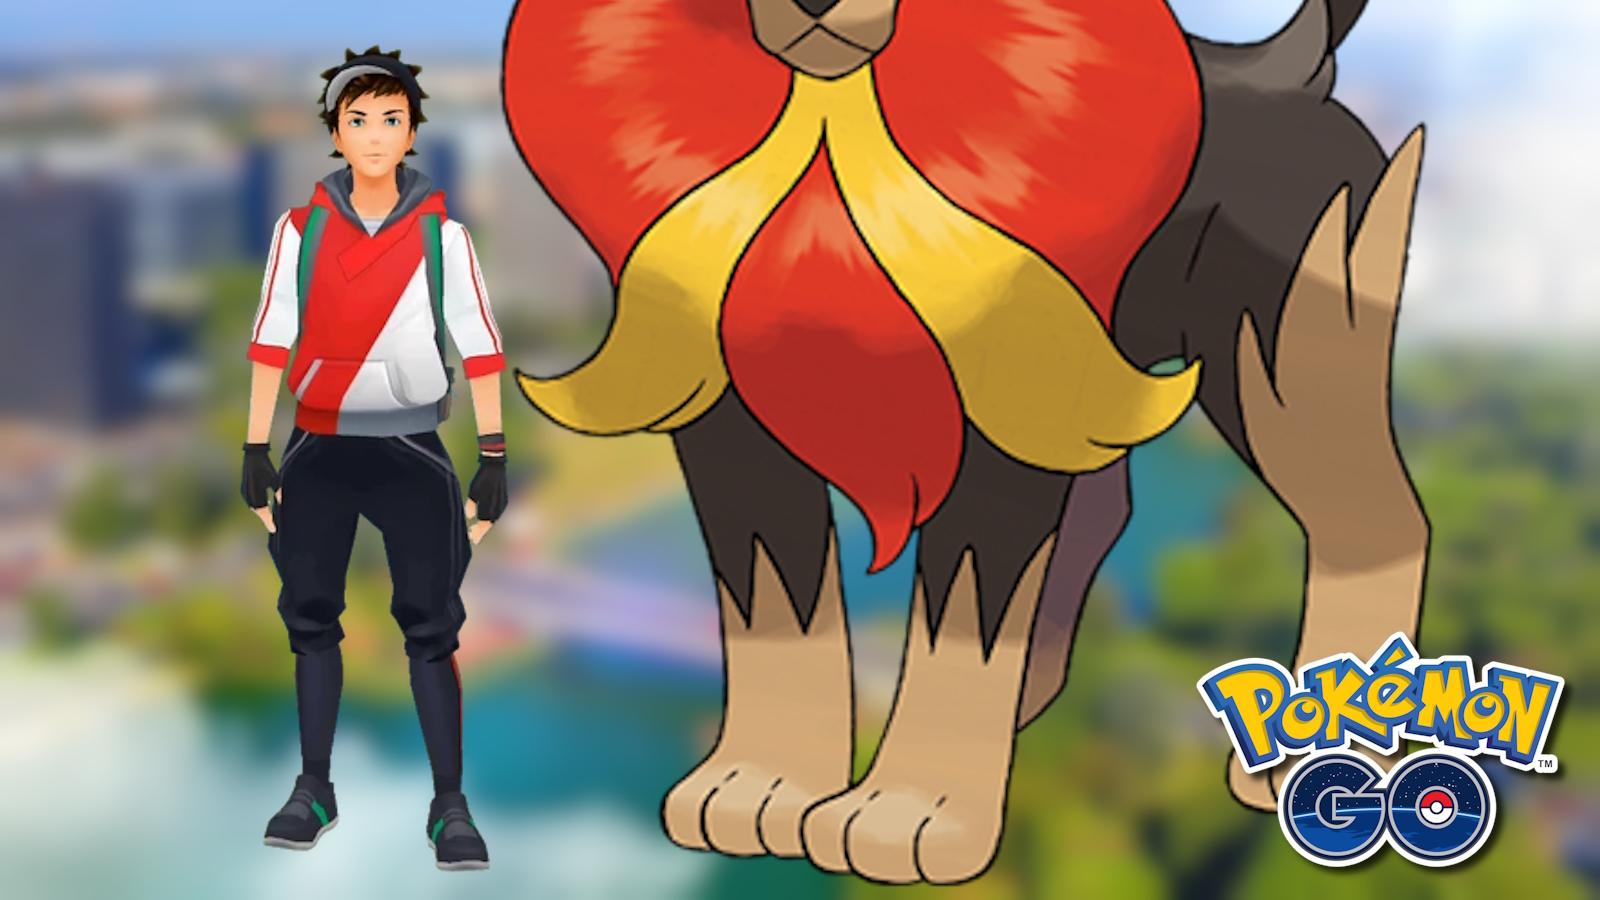 Pokemon Go trainer and Pyroar height scaling comparison.